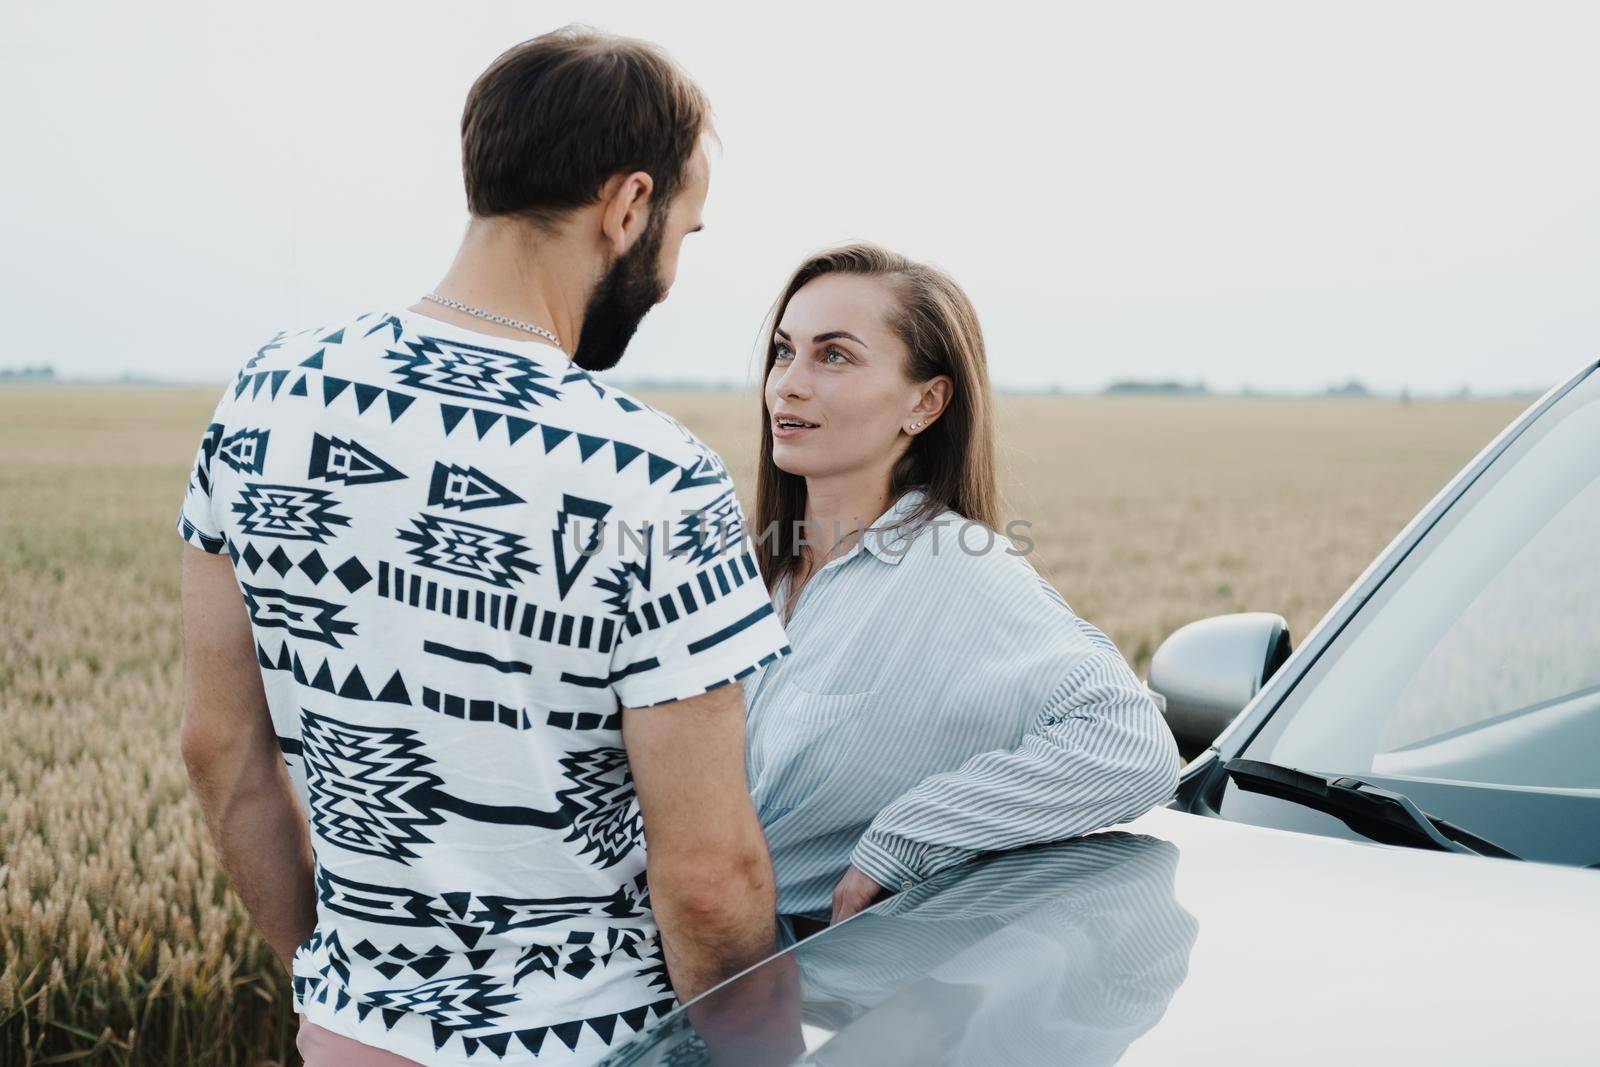 Caucasian woman and man having conversation outdoors near the car in the field, middle-aged couple on road trip